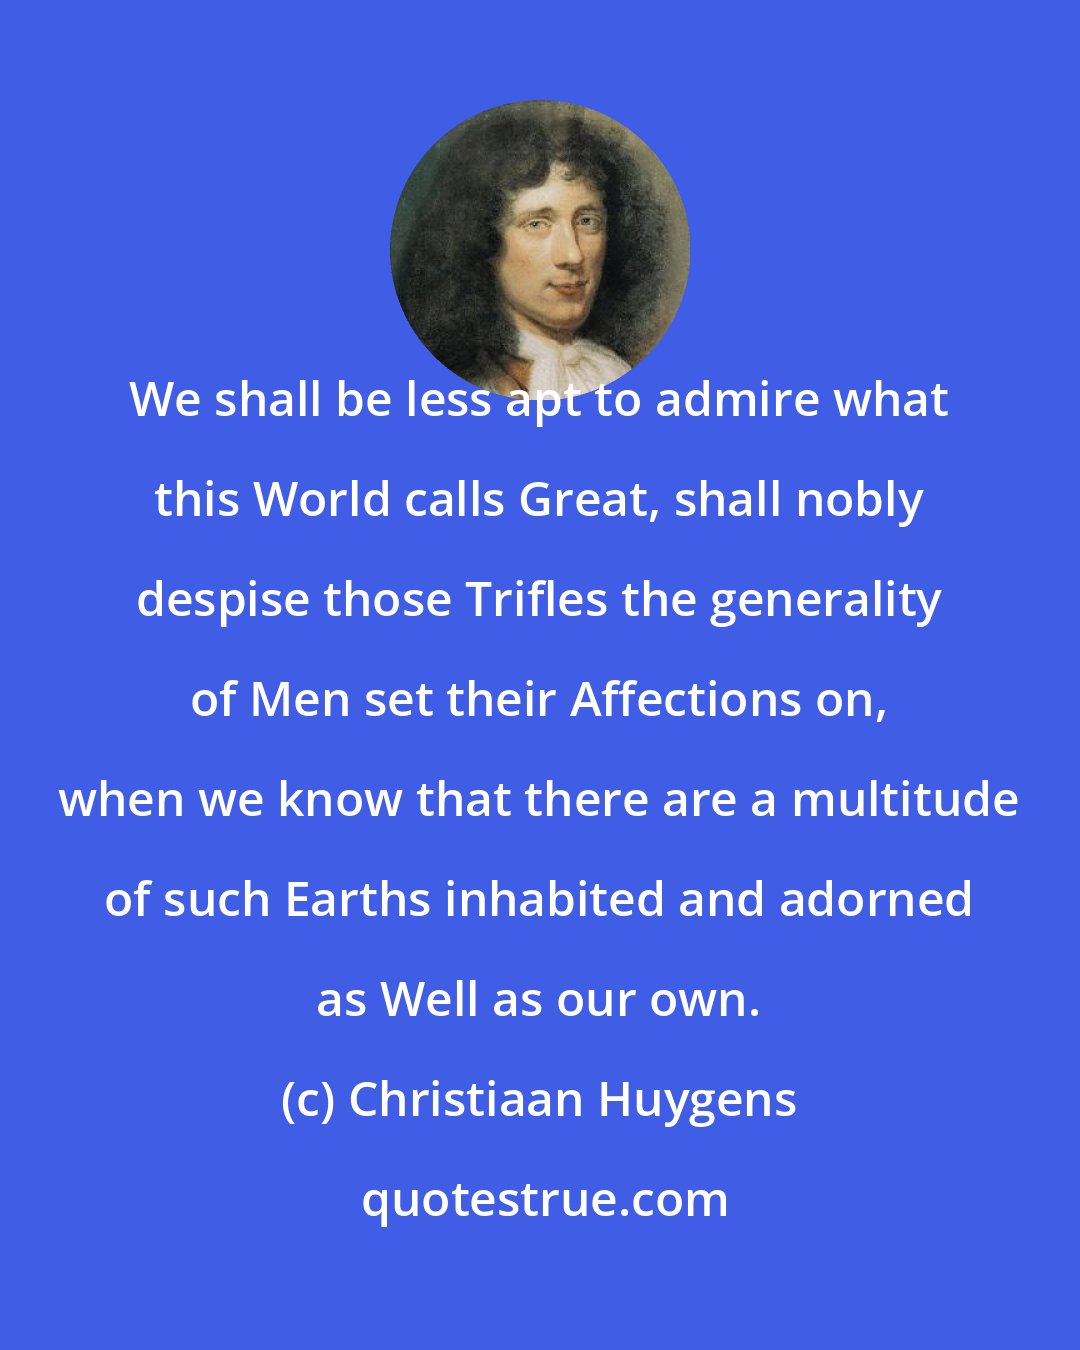 Christiaan Huygens: We shall be less apt to admire what this World calls Great, shall nobly despise those Trifles the generality of Men set their Affections on, when we know that there are a multitude of such Earths inhabited and adorned as Well as our own.